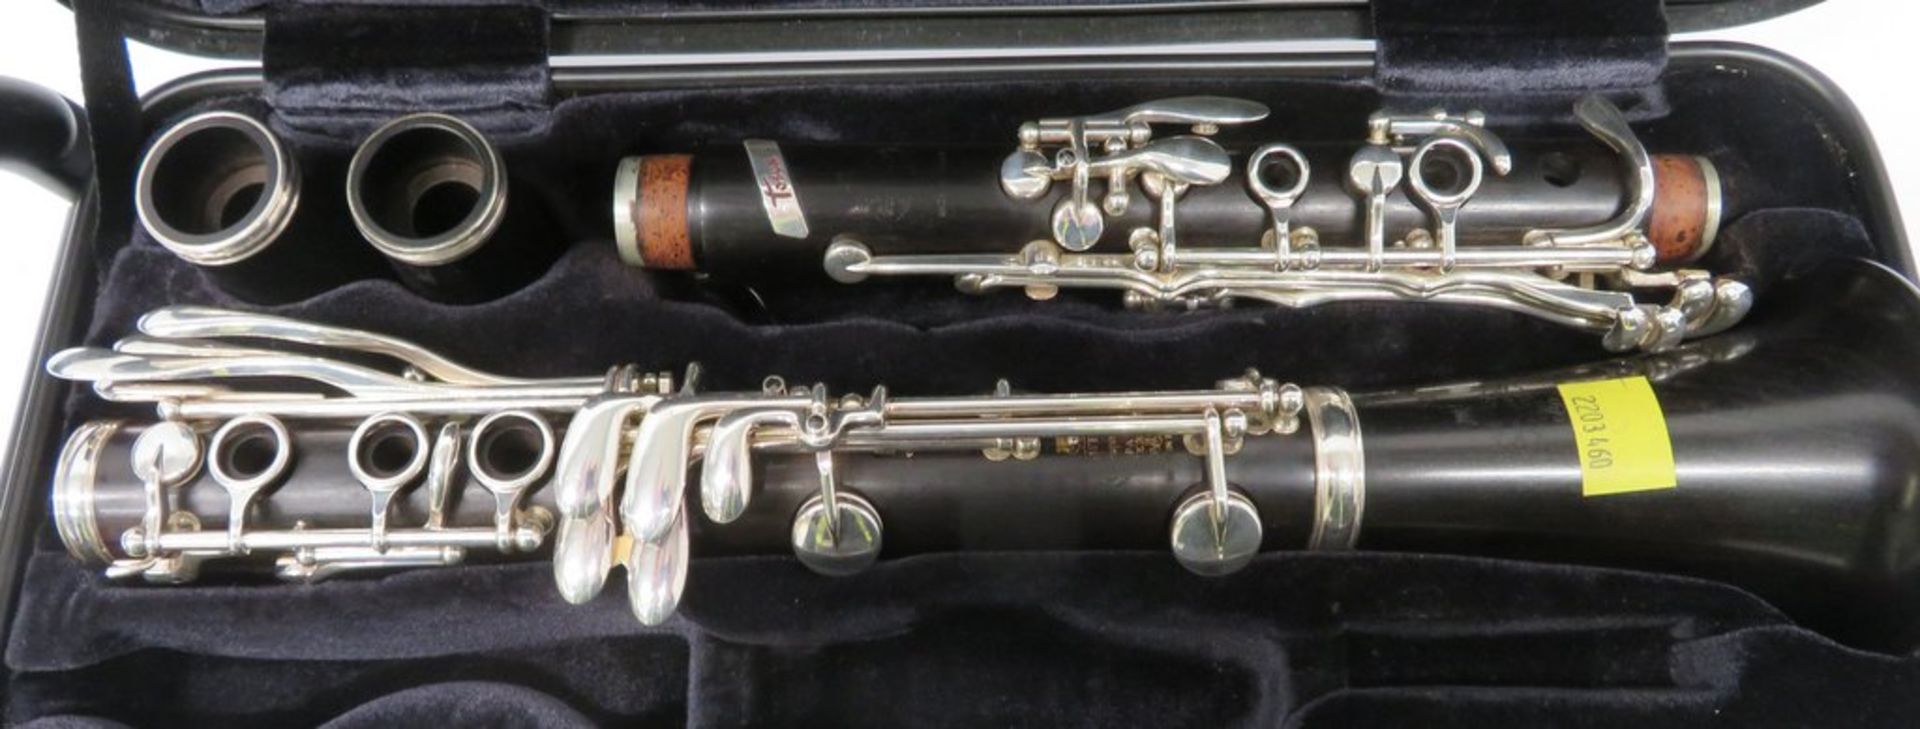 Buffet Crampon Tosca Clarinet Complete With Case. - Image 2 of 15